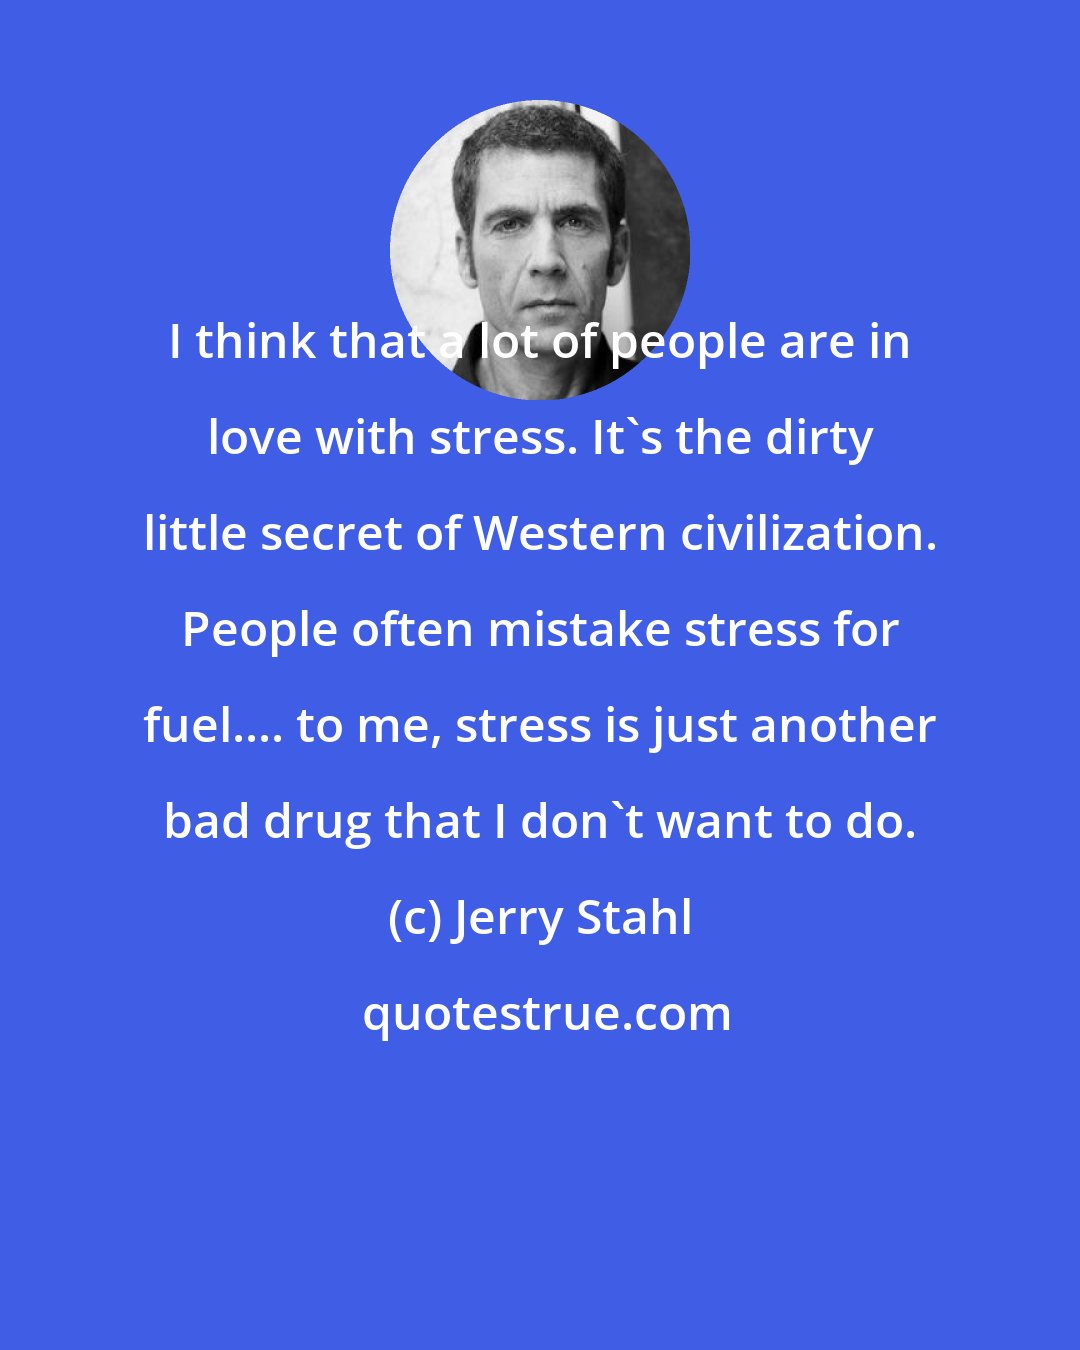 Jerry Stahl: I think that a lot of people are in love with stress. It's the dirty little secret of Western civilization. People often mistake stress for fuel.... to me, stress is just another bad drug that I don't want to do.